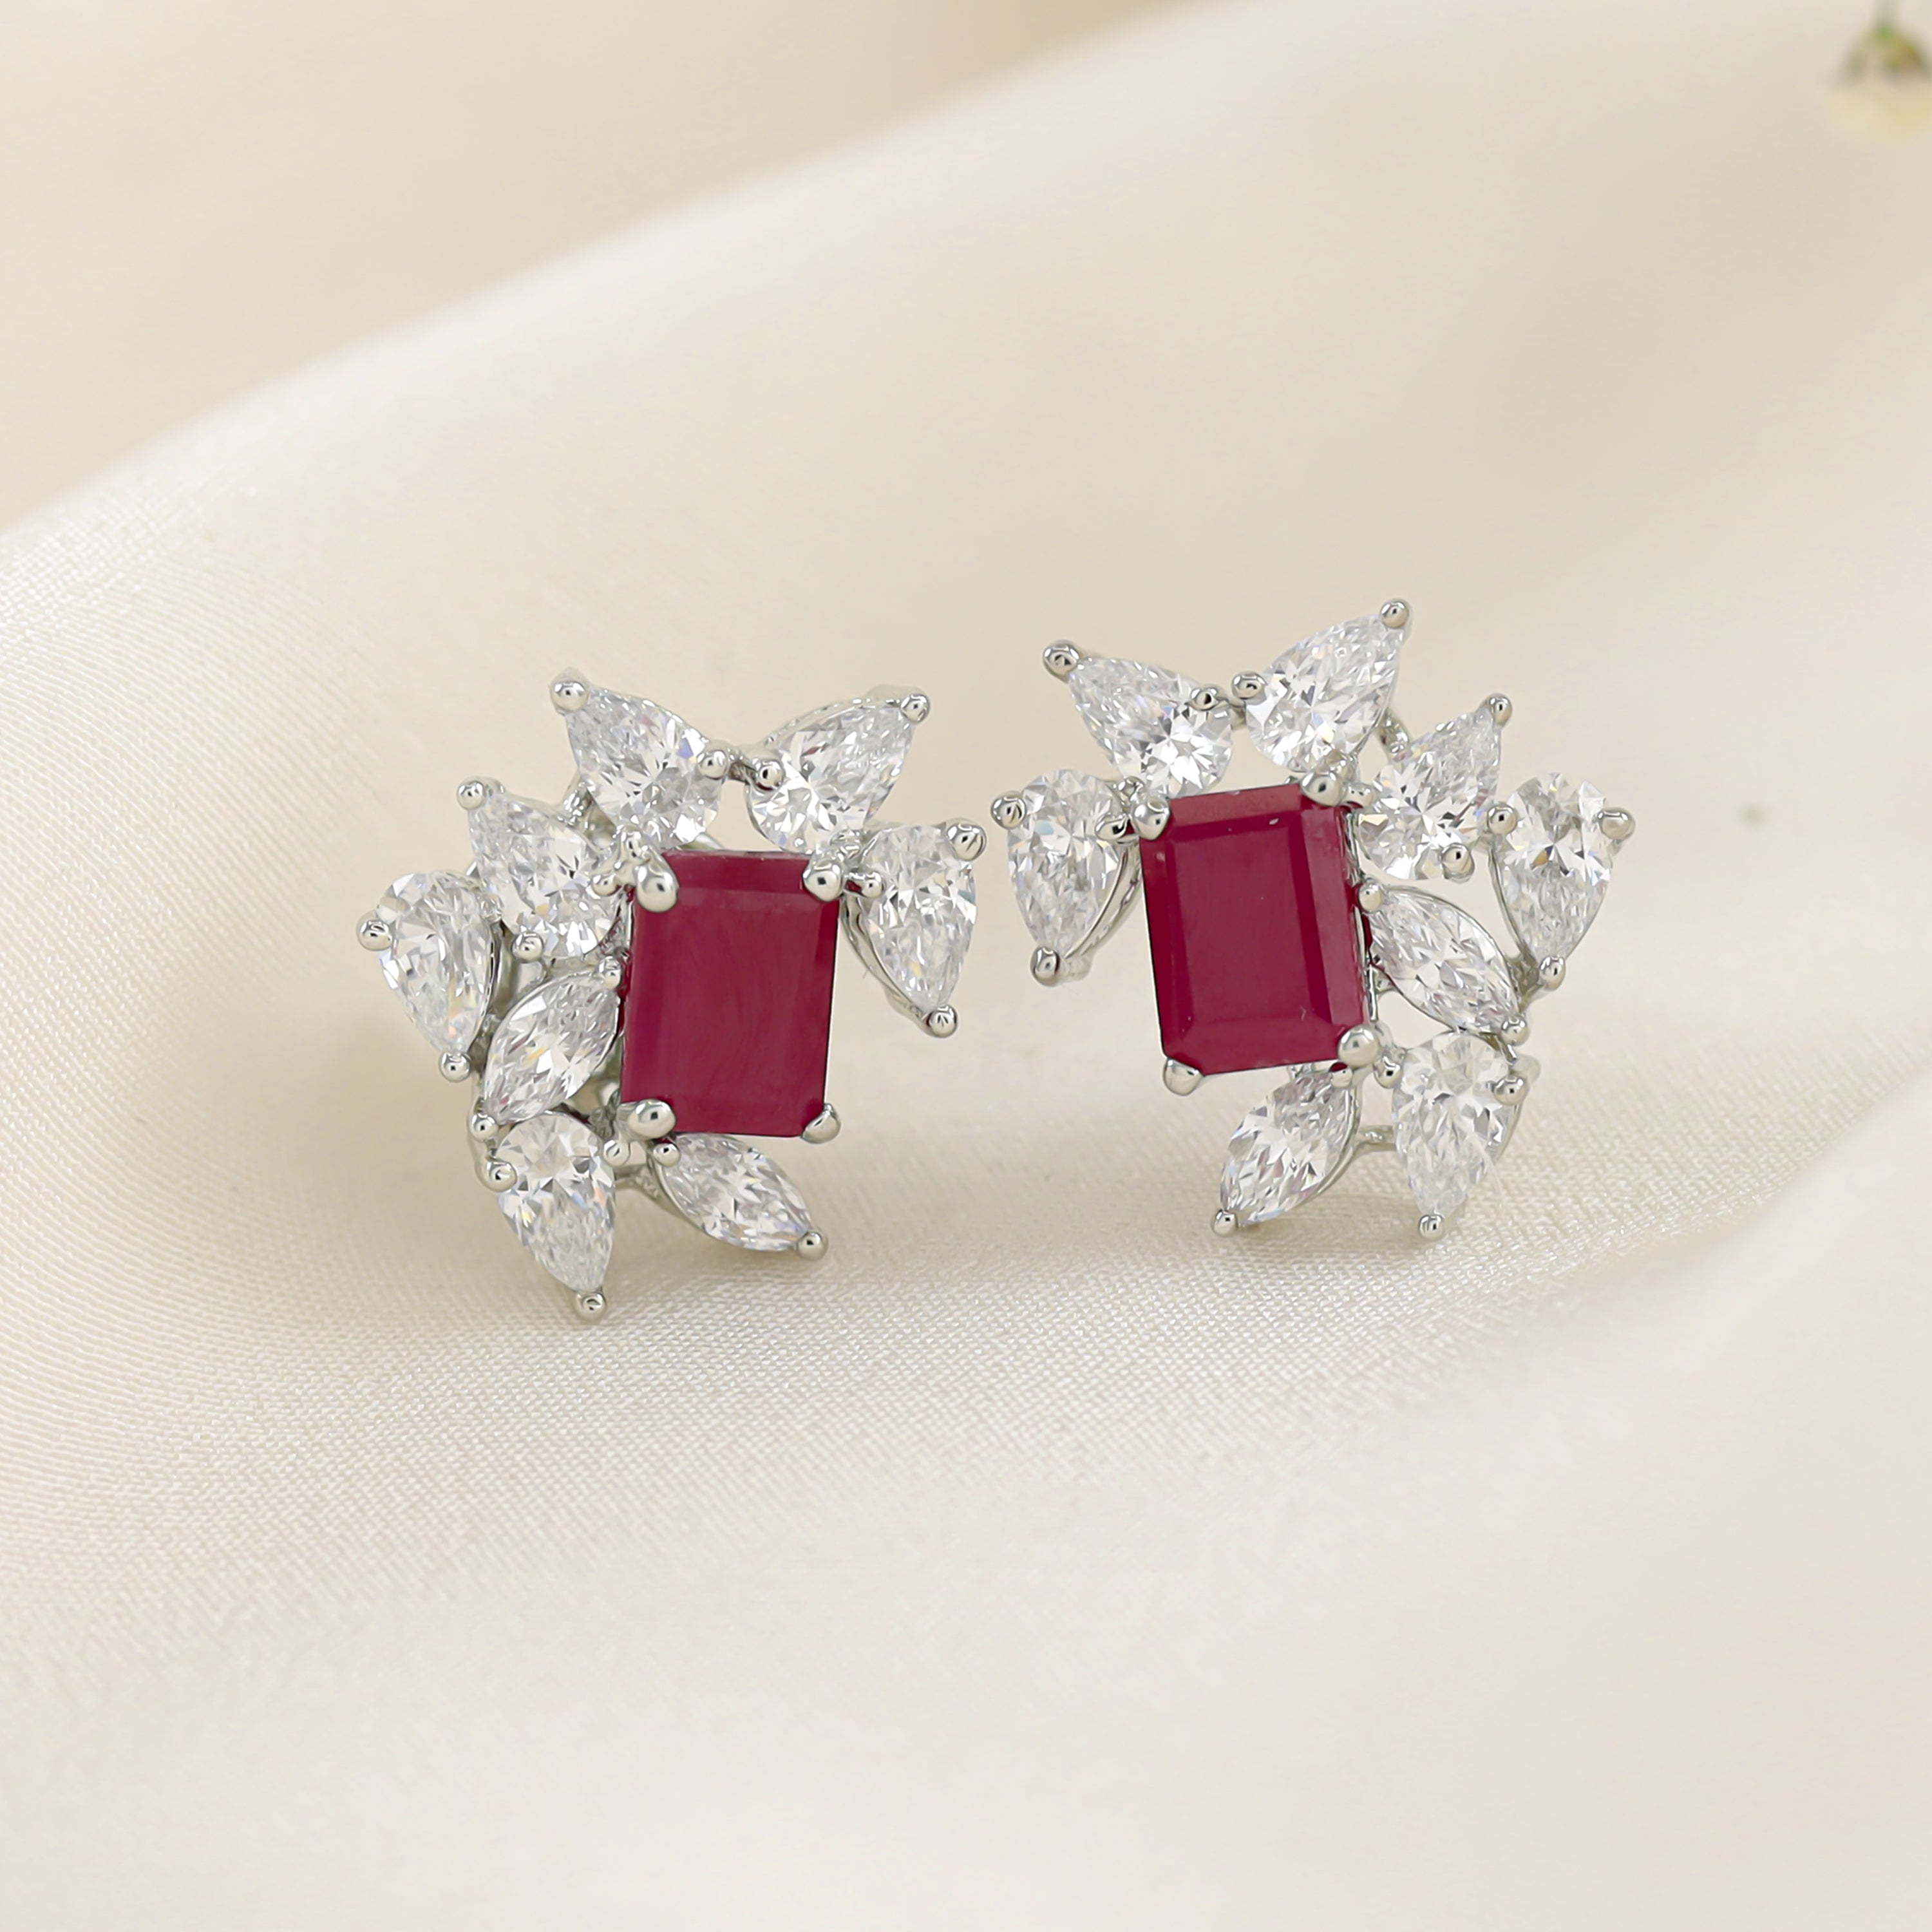 Ruby Drop Earrings made with SWAROVSKI® Crystals | eBay